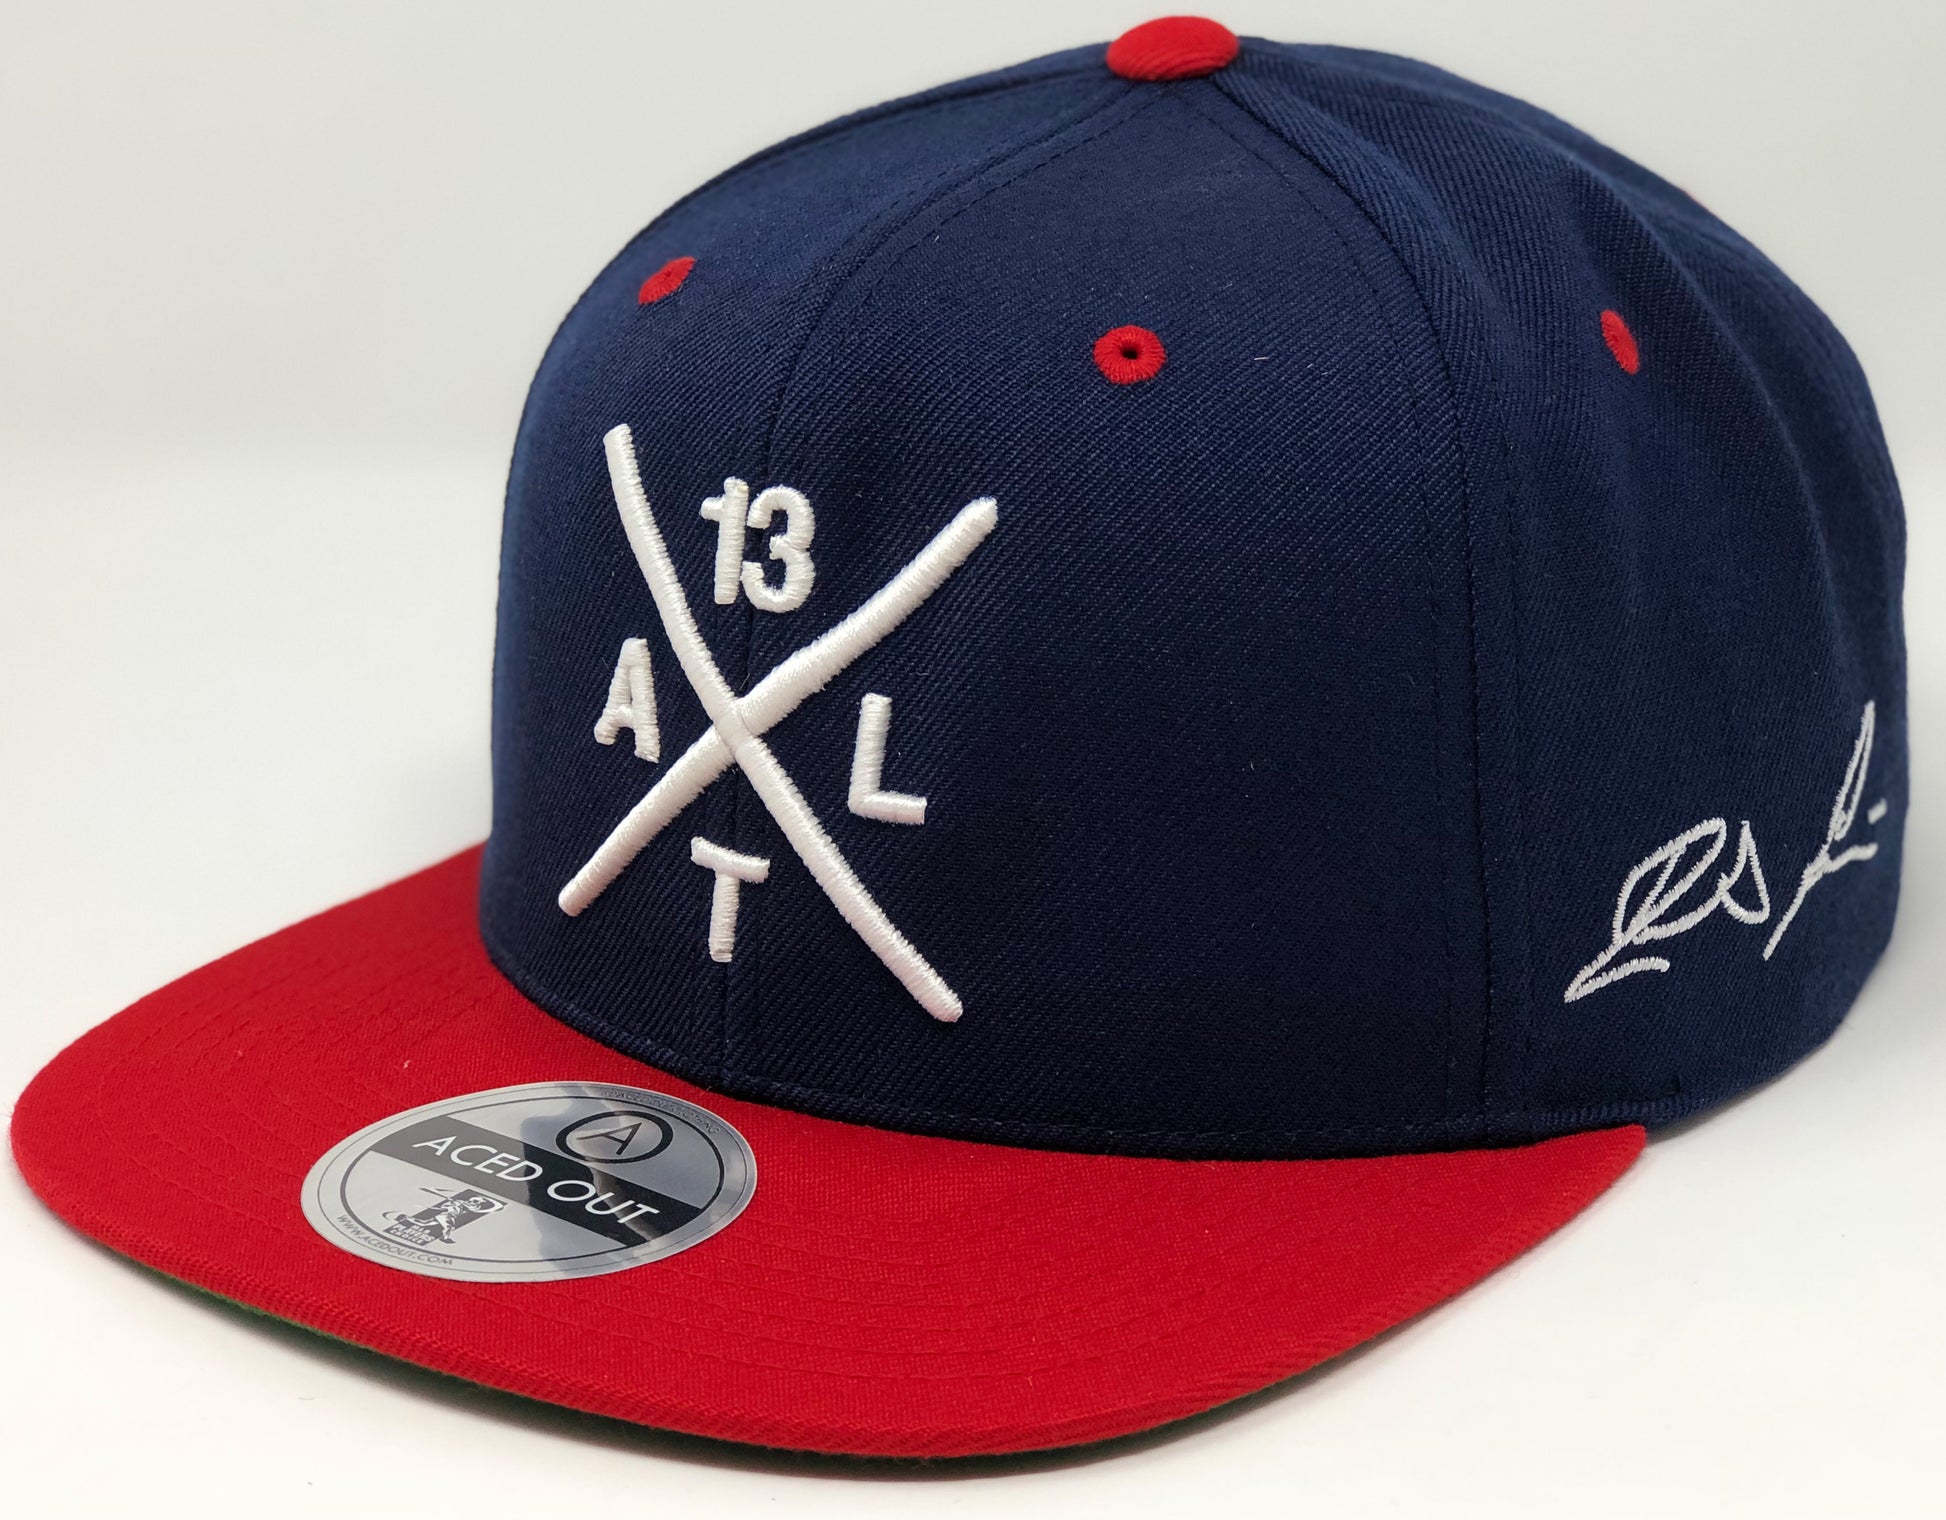 Ronald Acuna Jr Compass Hat - Navy/Red Snapback